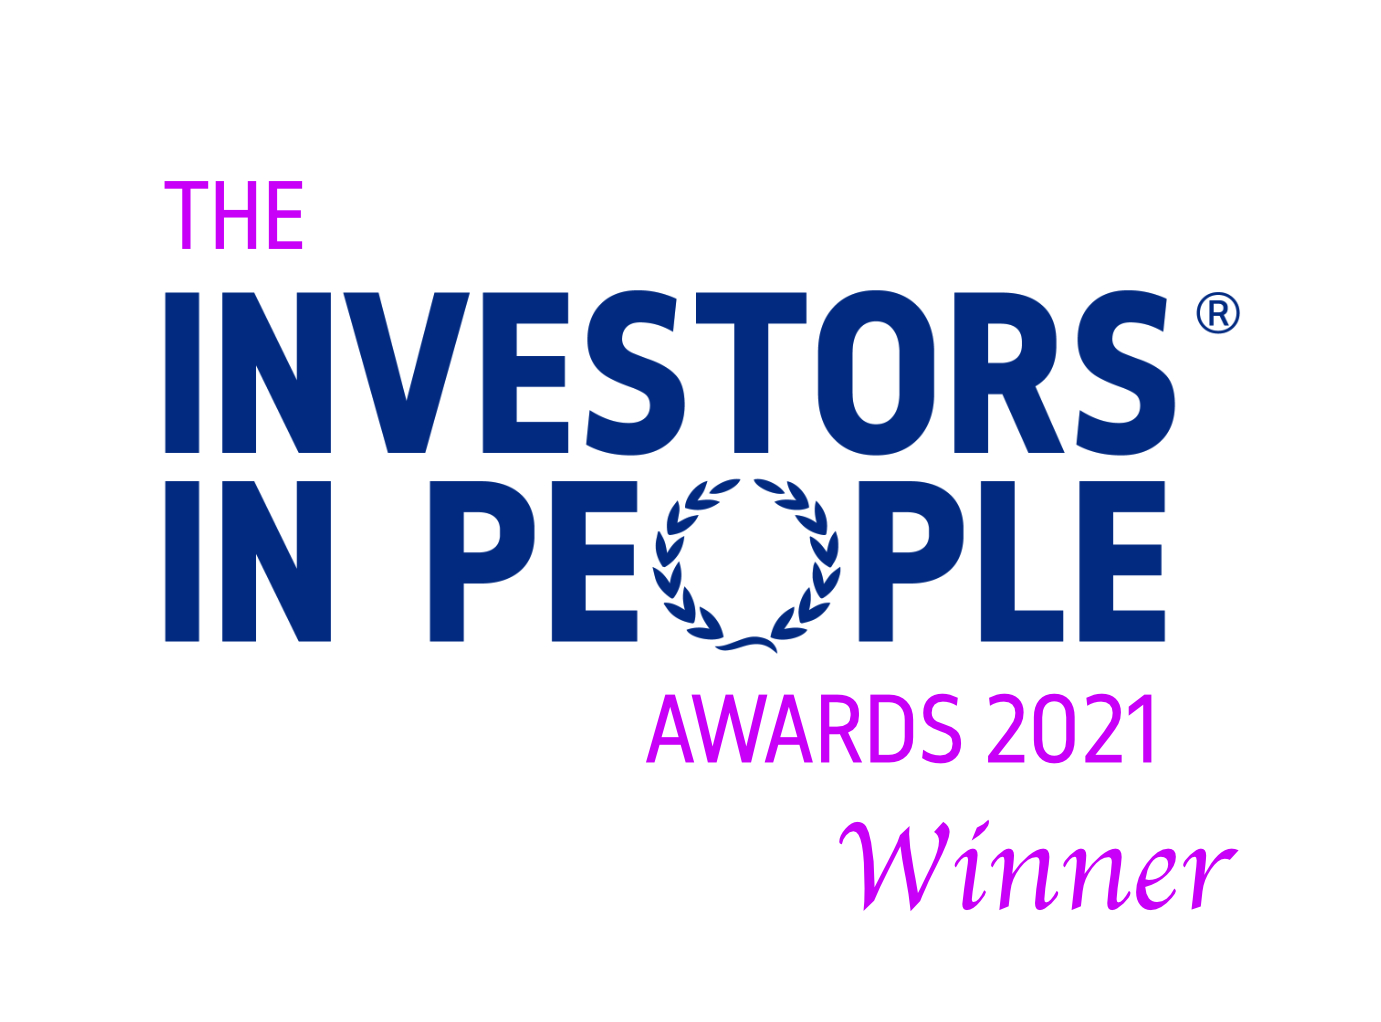 GRAHAM scoops Investors in People ‘Excellence in Health and Wellbeing’ Award